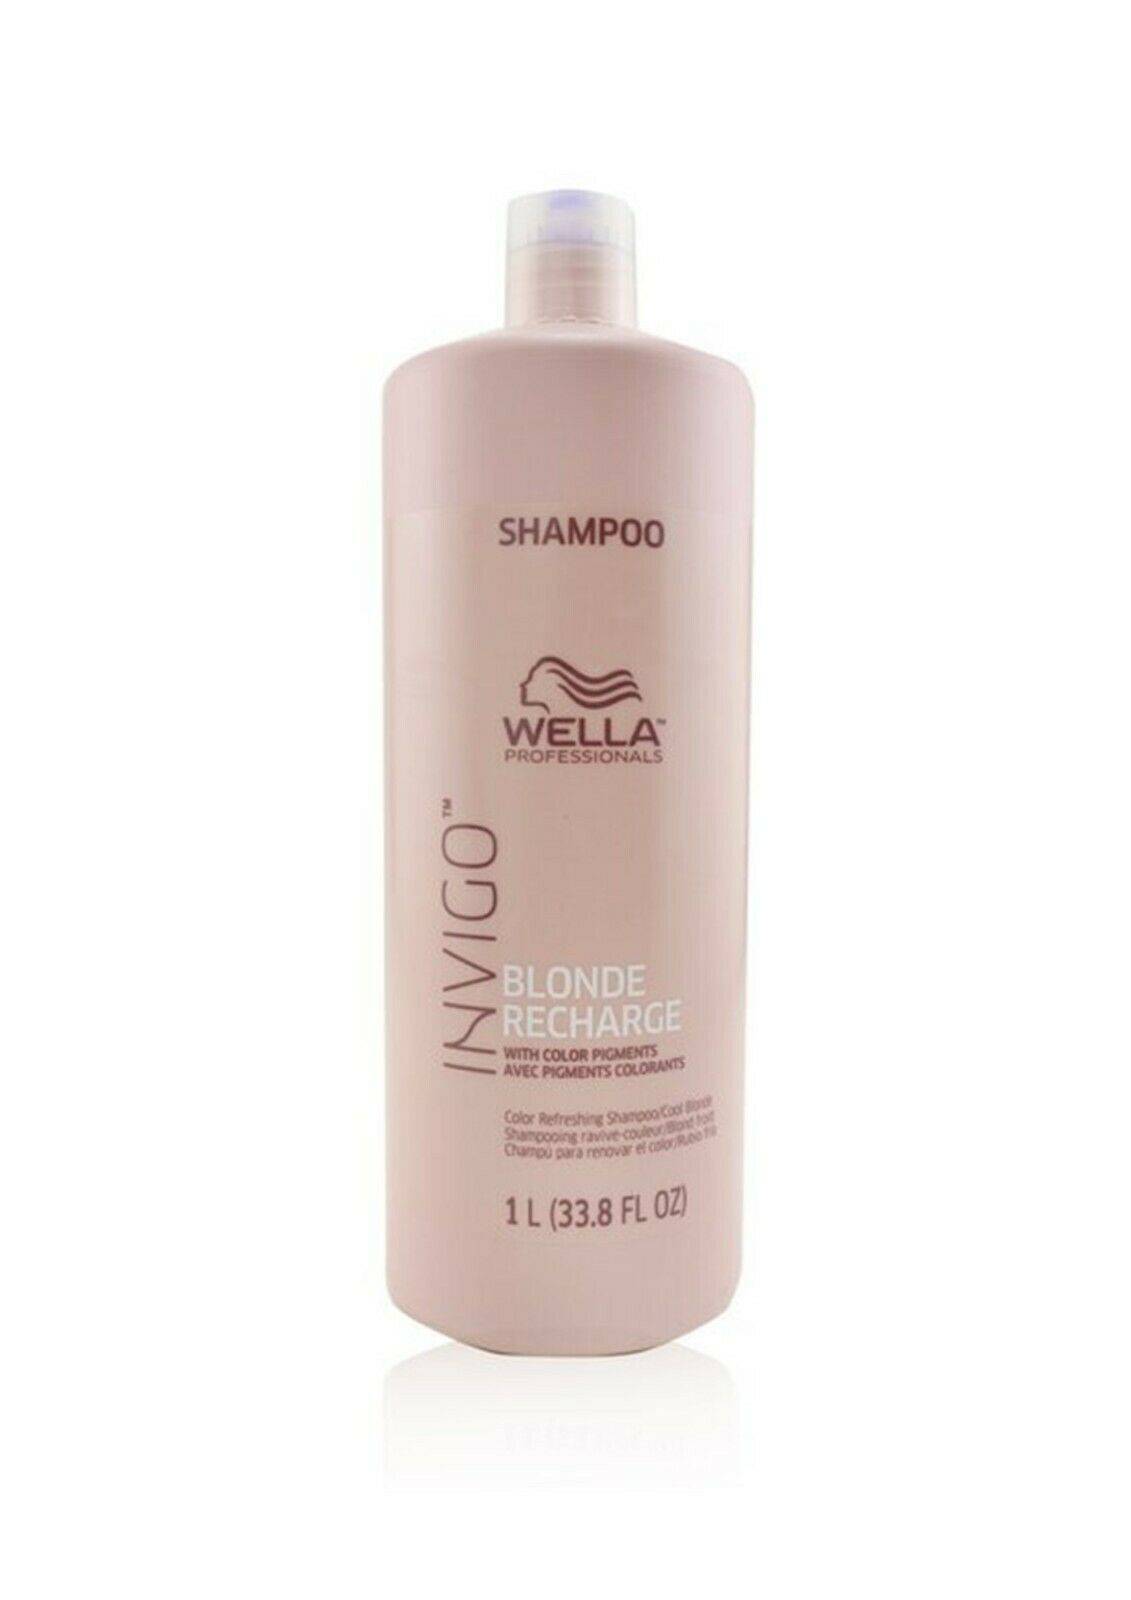 Wella Professionals Invigo Blonde Recharge Shampoo 1000ml  Color Refreshing Cool Blonde Silver - On Line Hair Depot